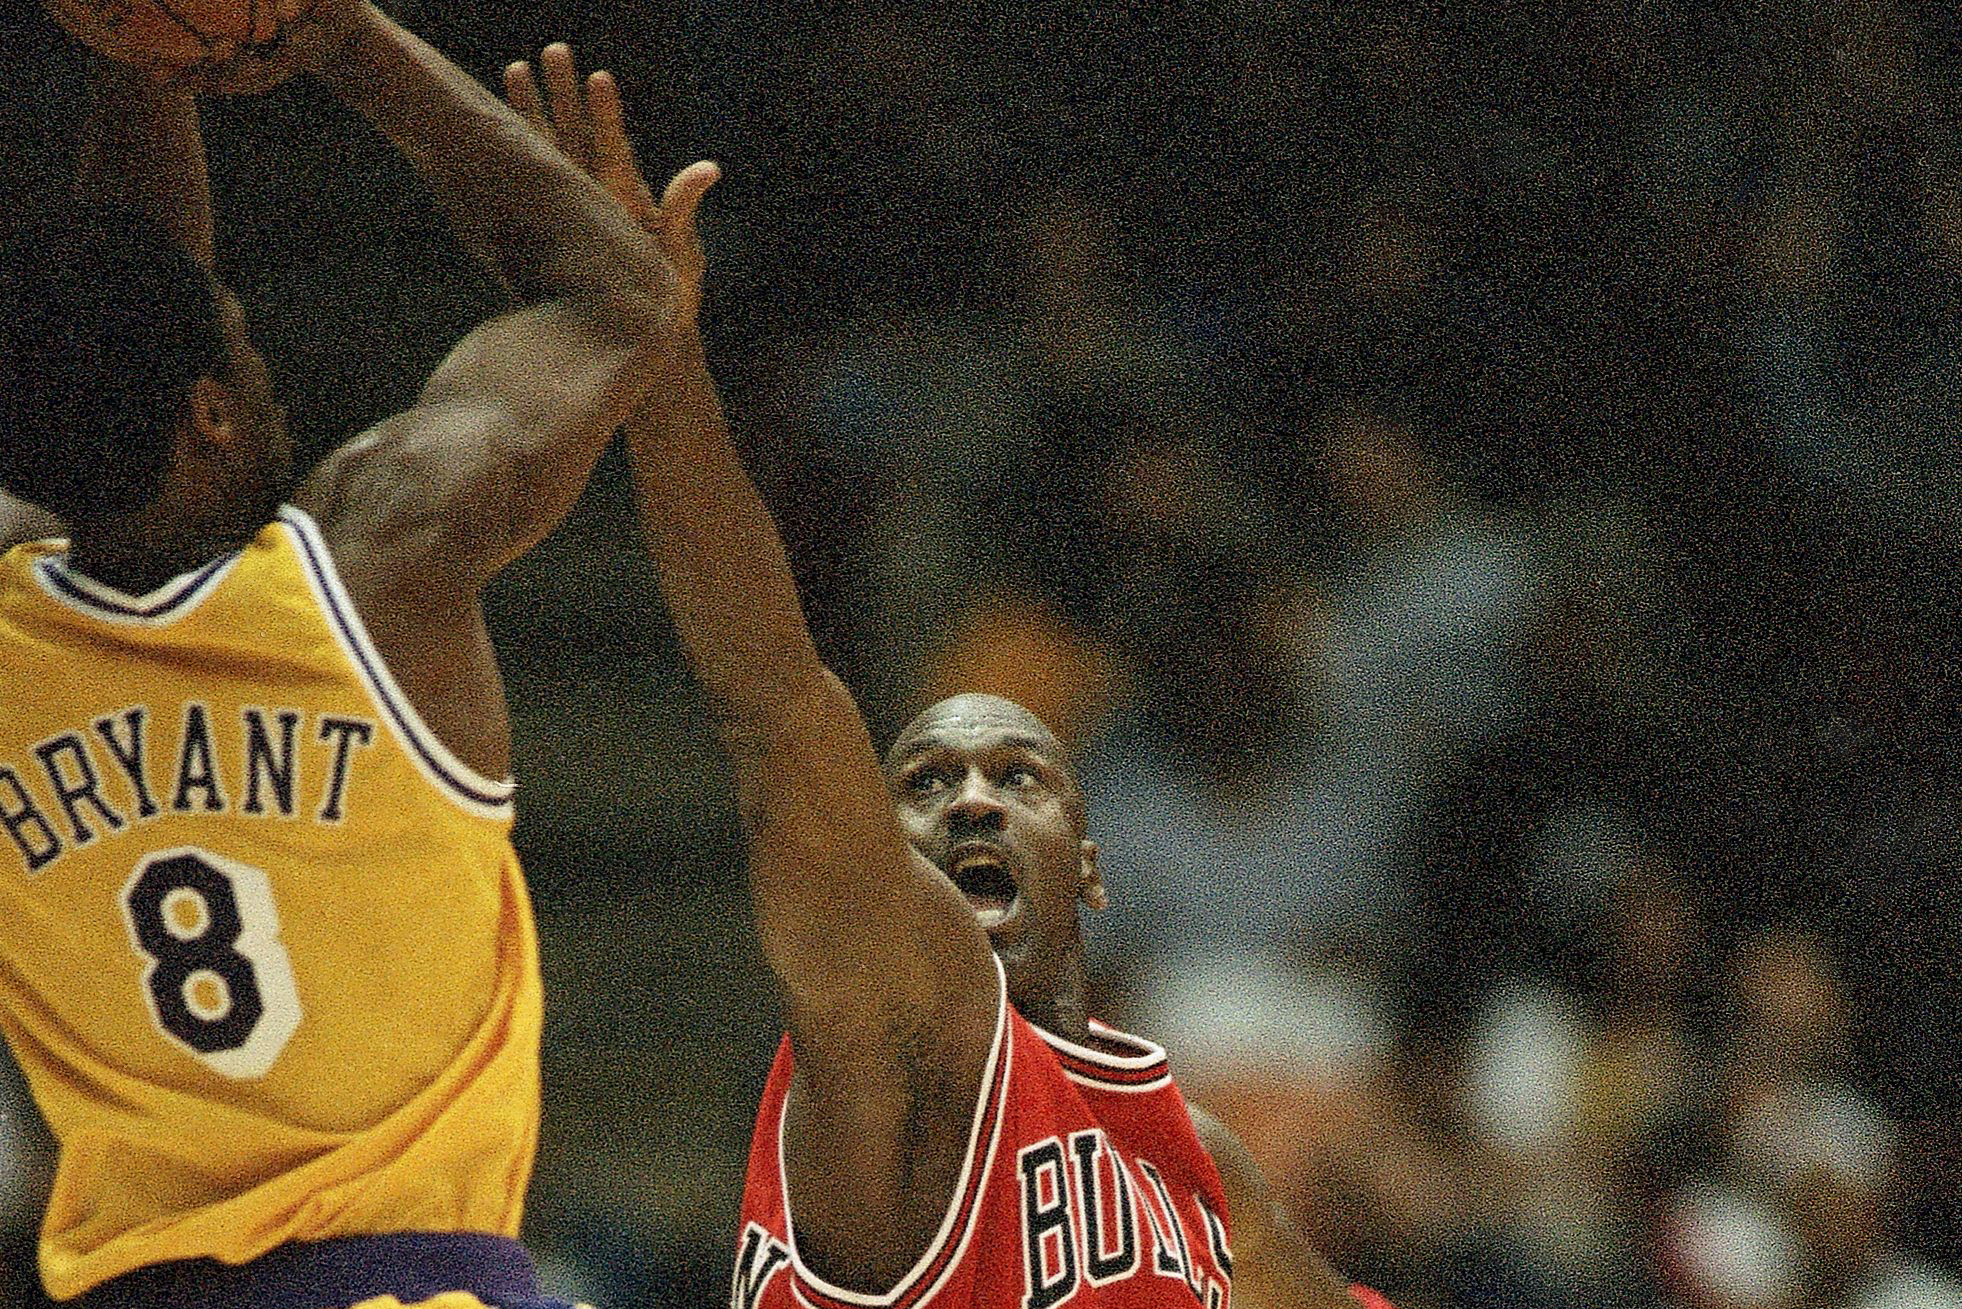 MJ giving Kobe Bryant advice during a game in 1997